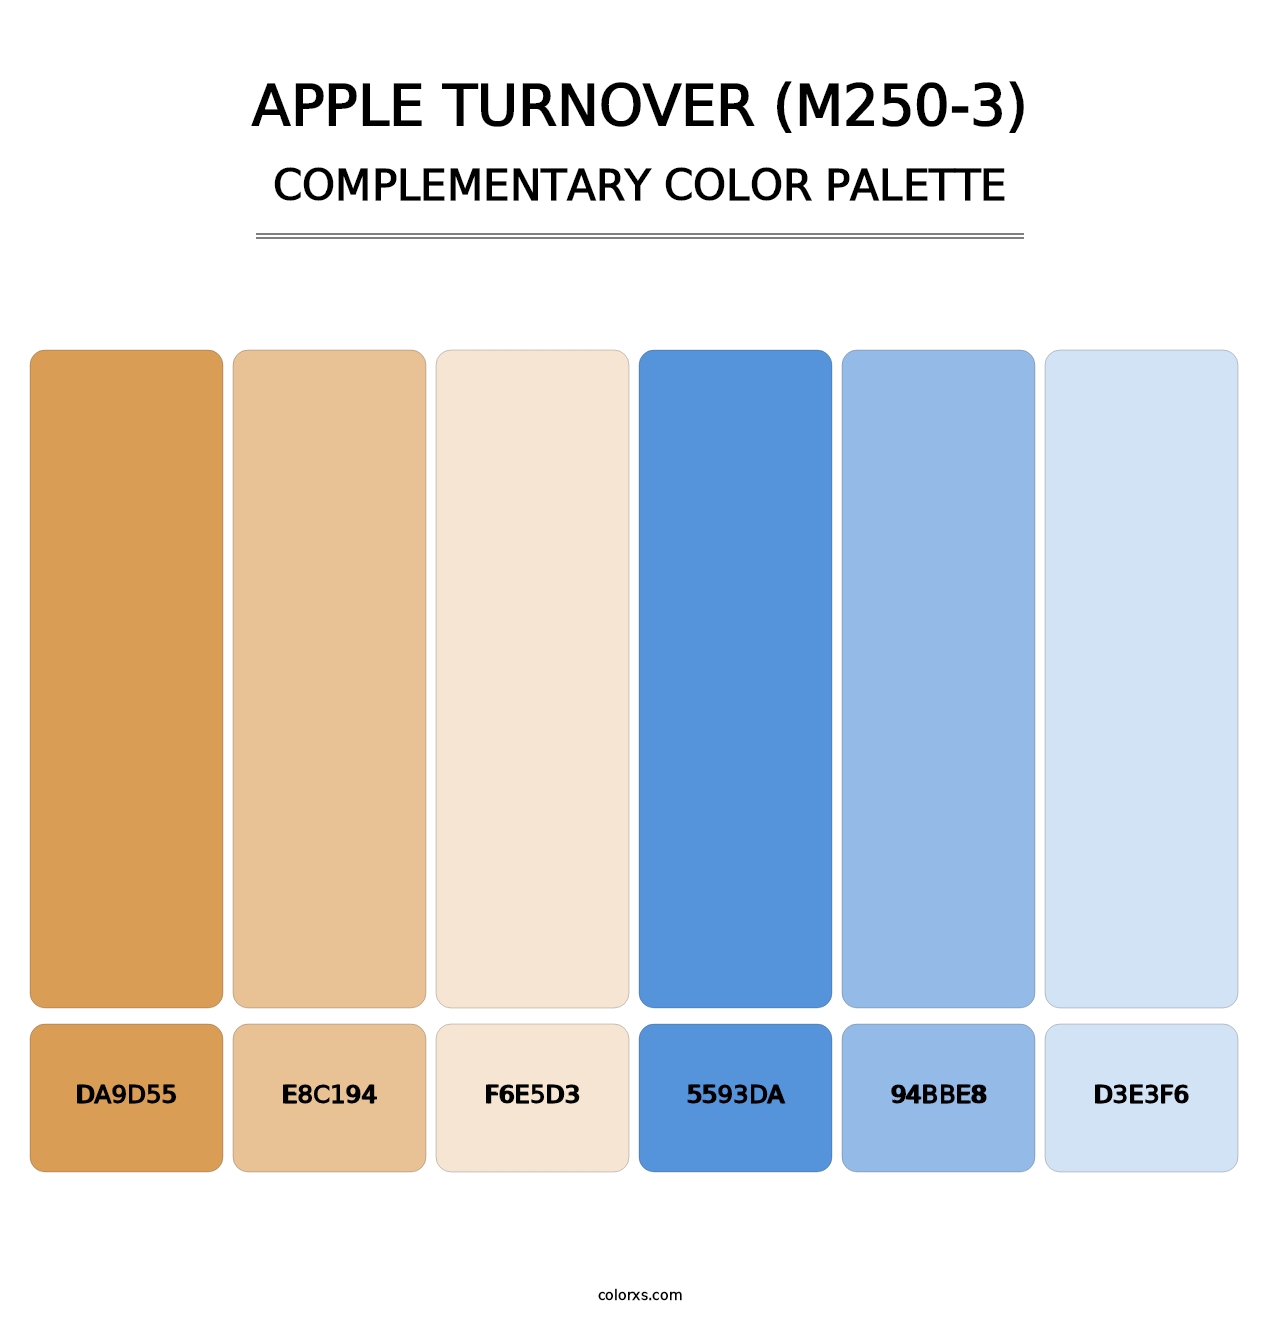 Apple Turnover (M250-3) - Complementary Color Palette